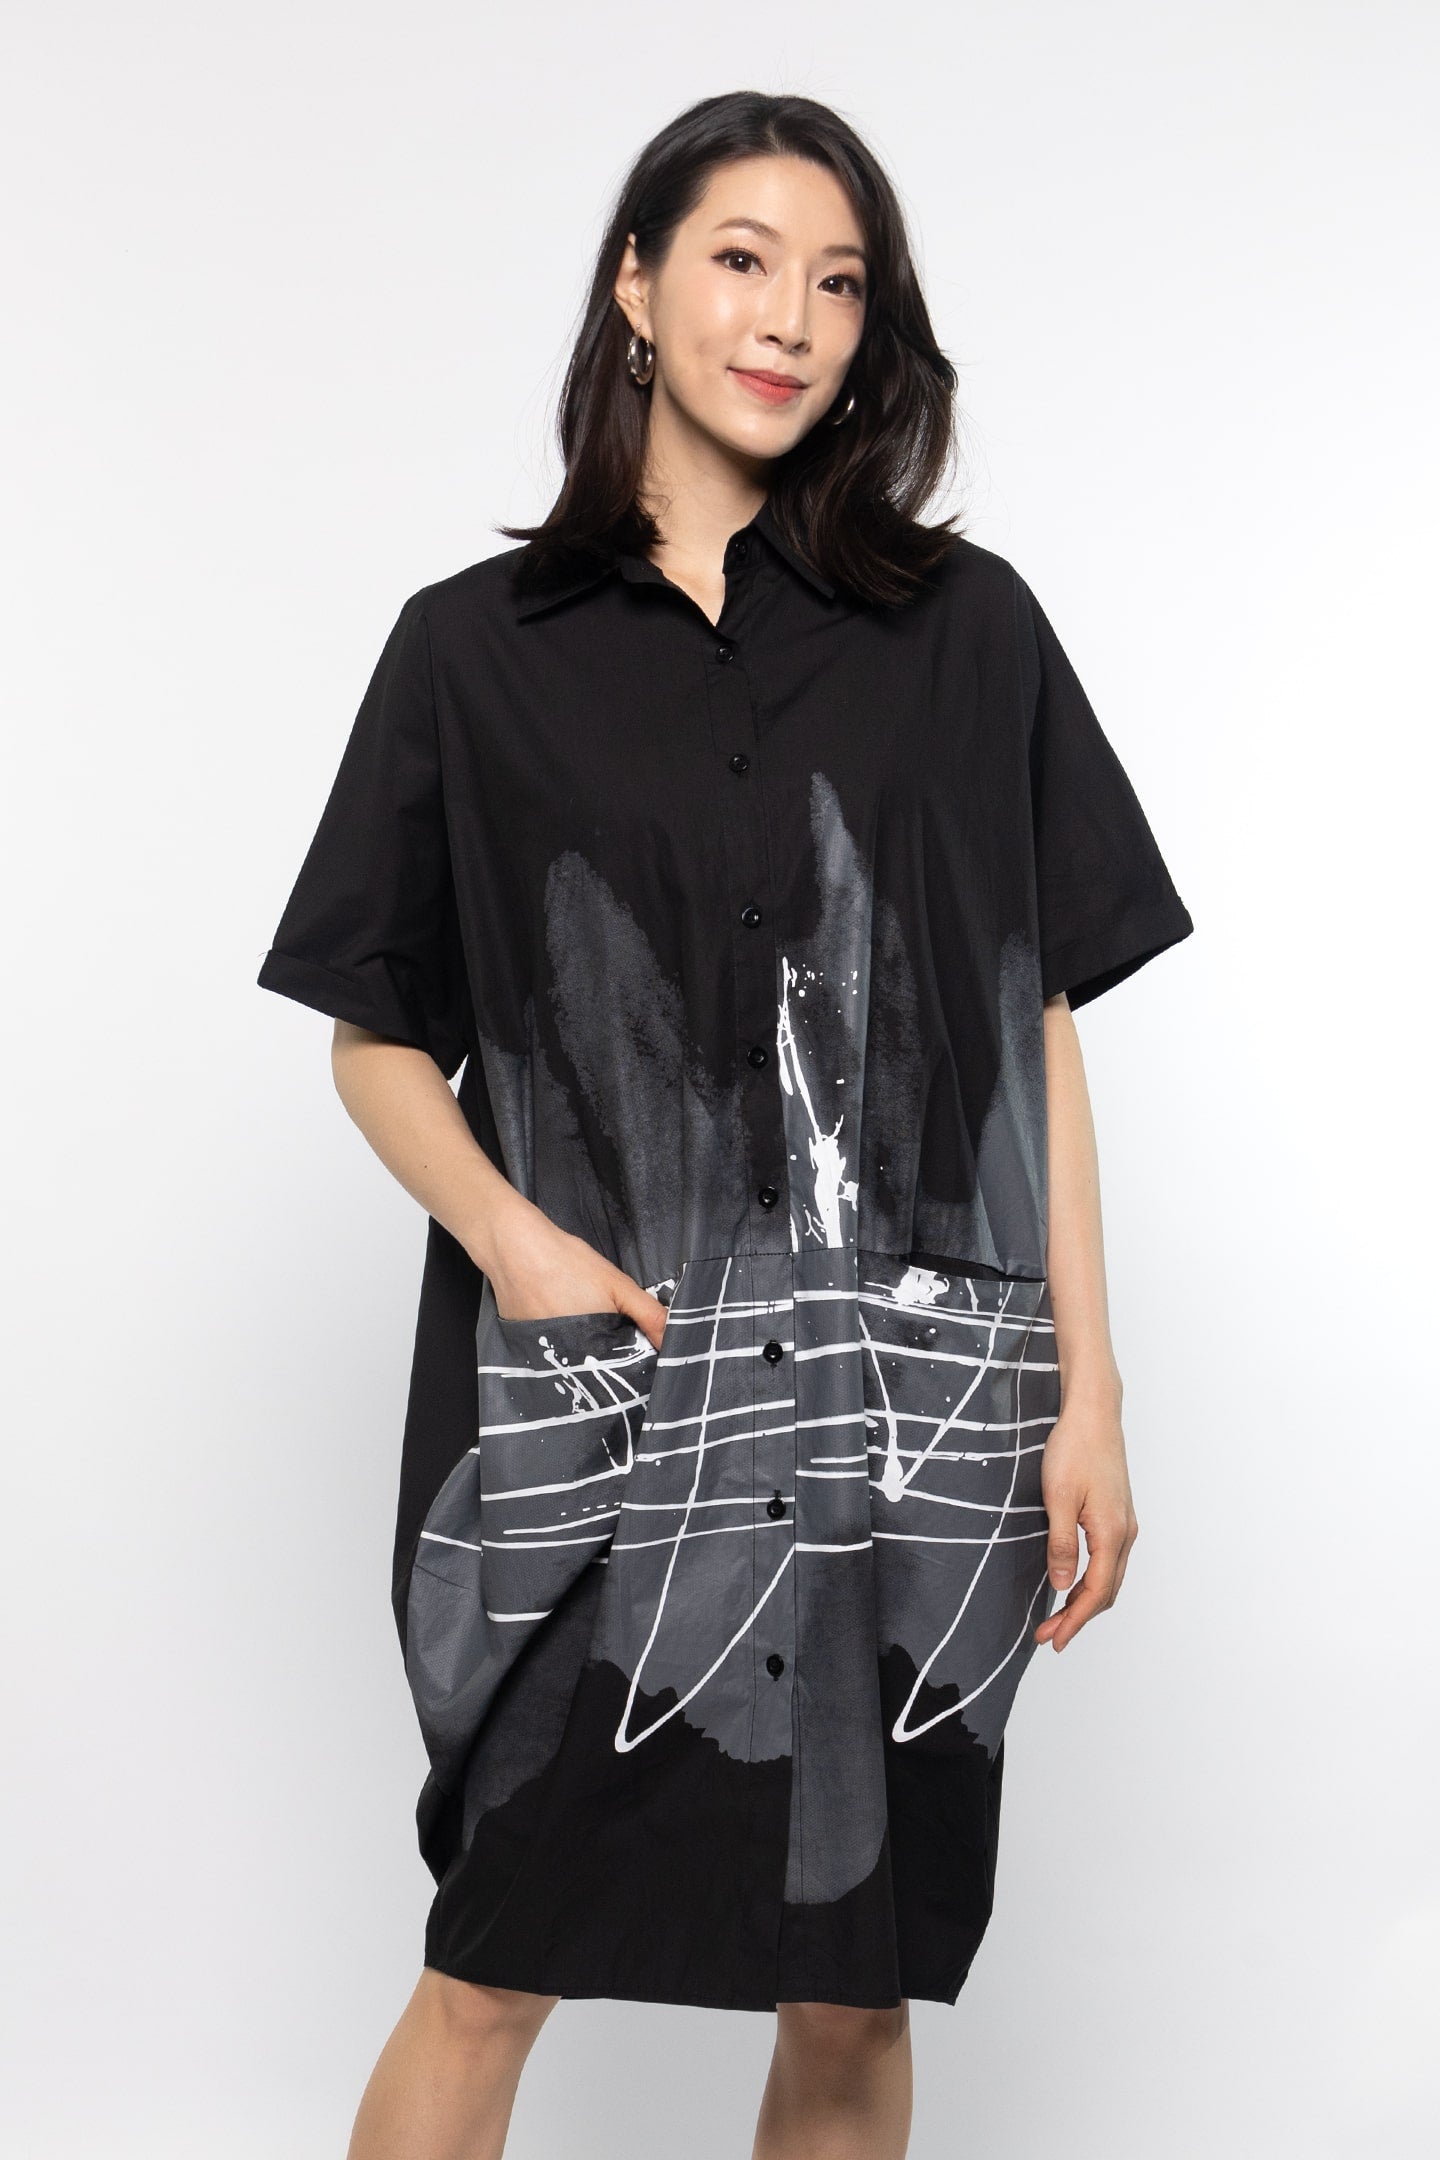 Backorders Isador Dress in Abstract